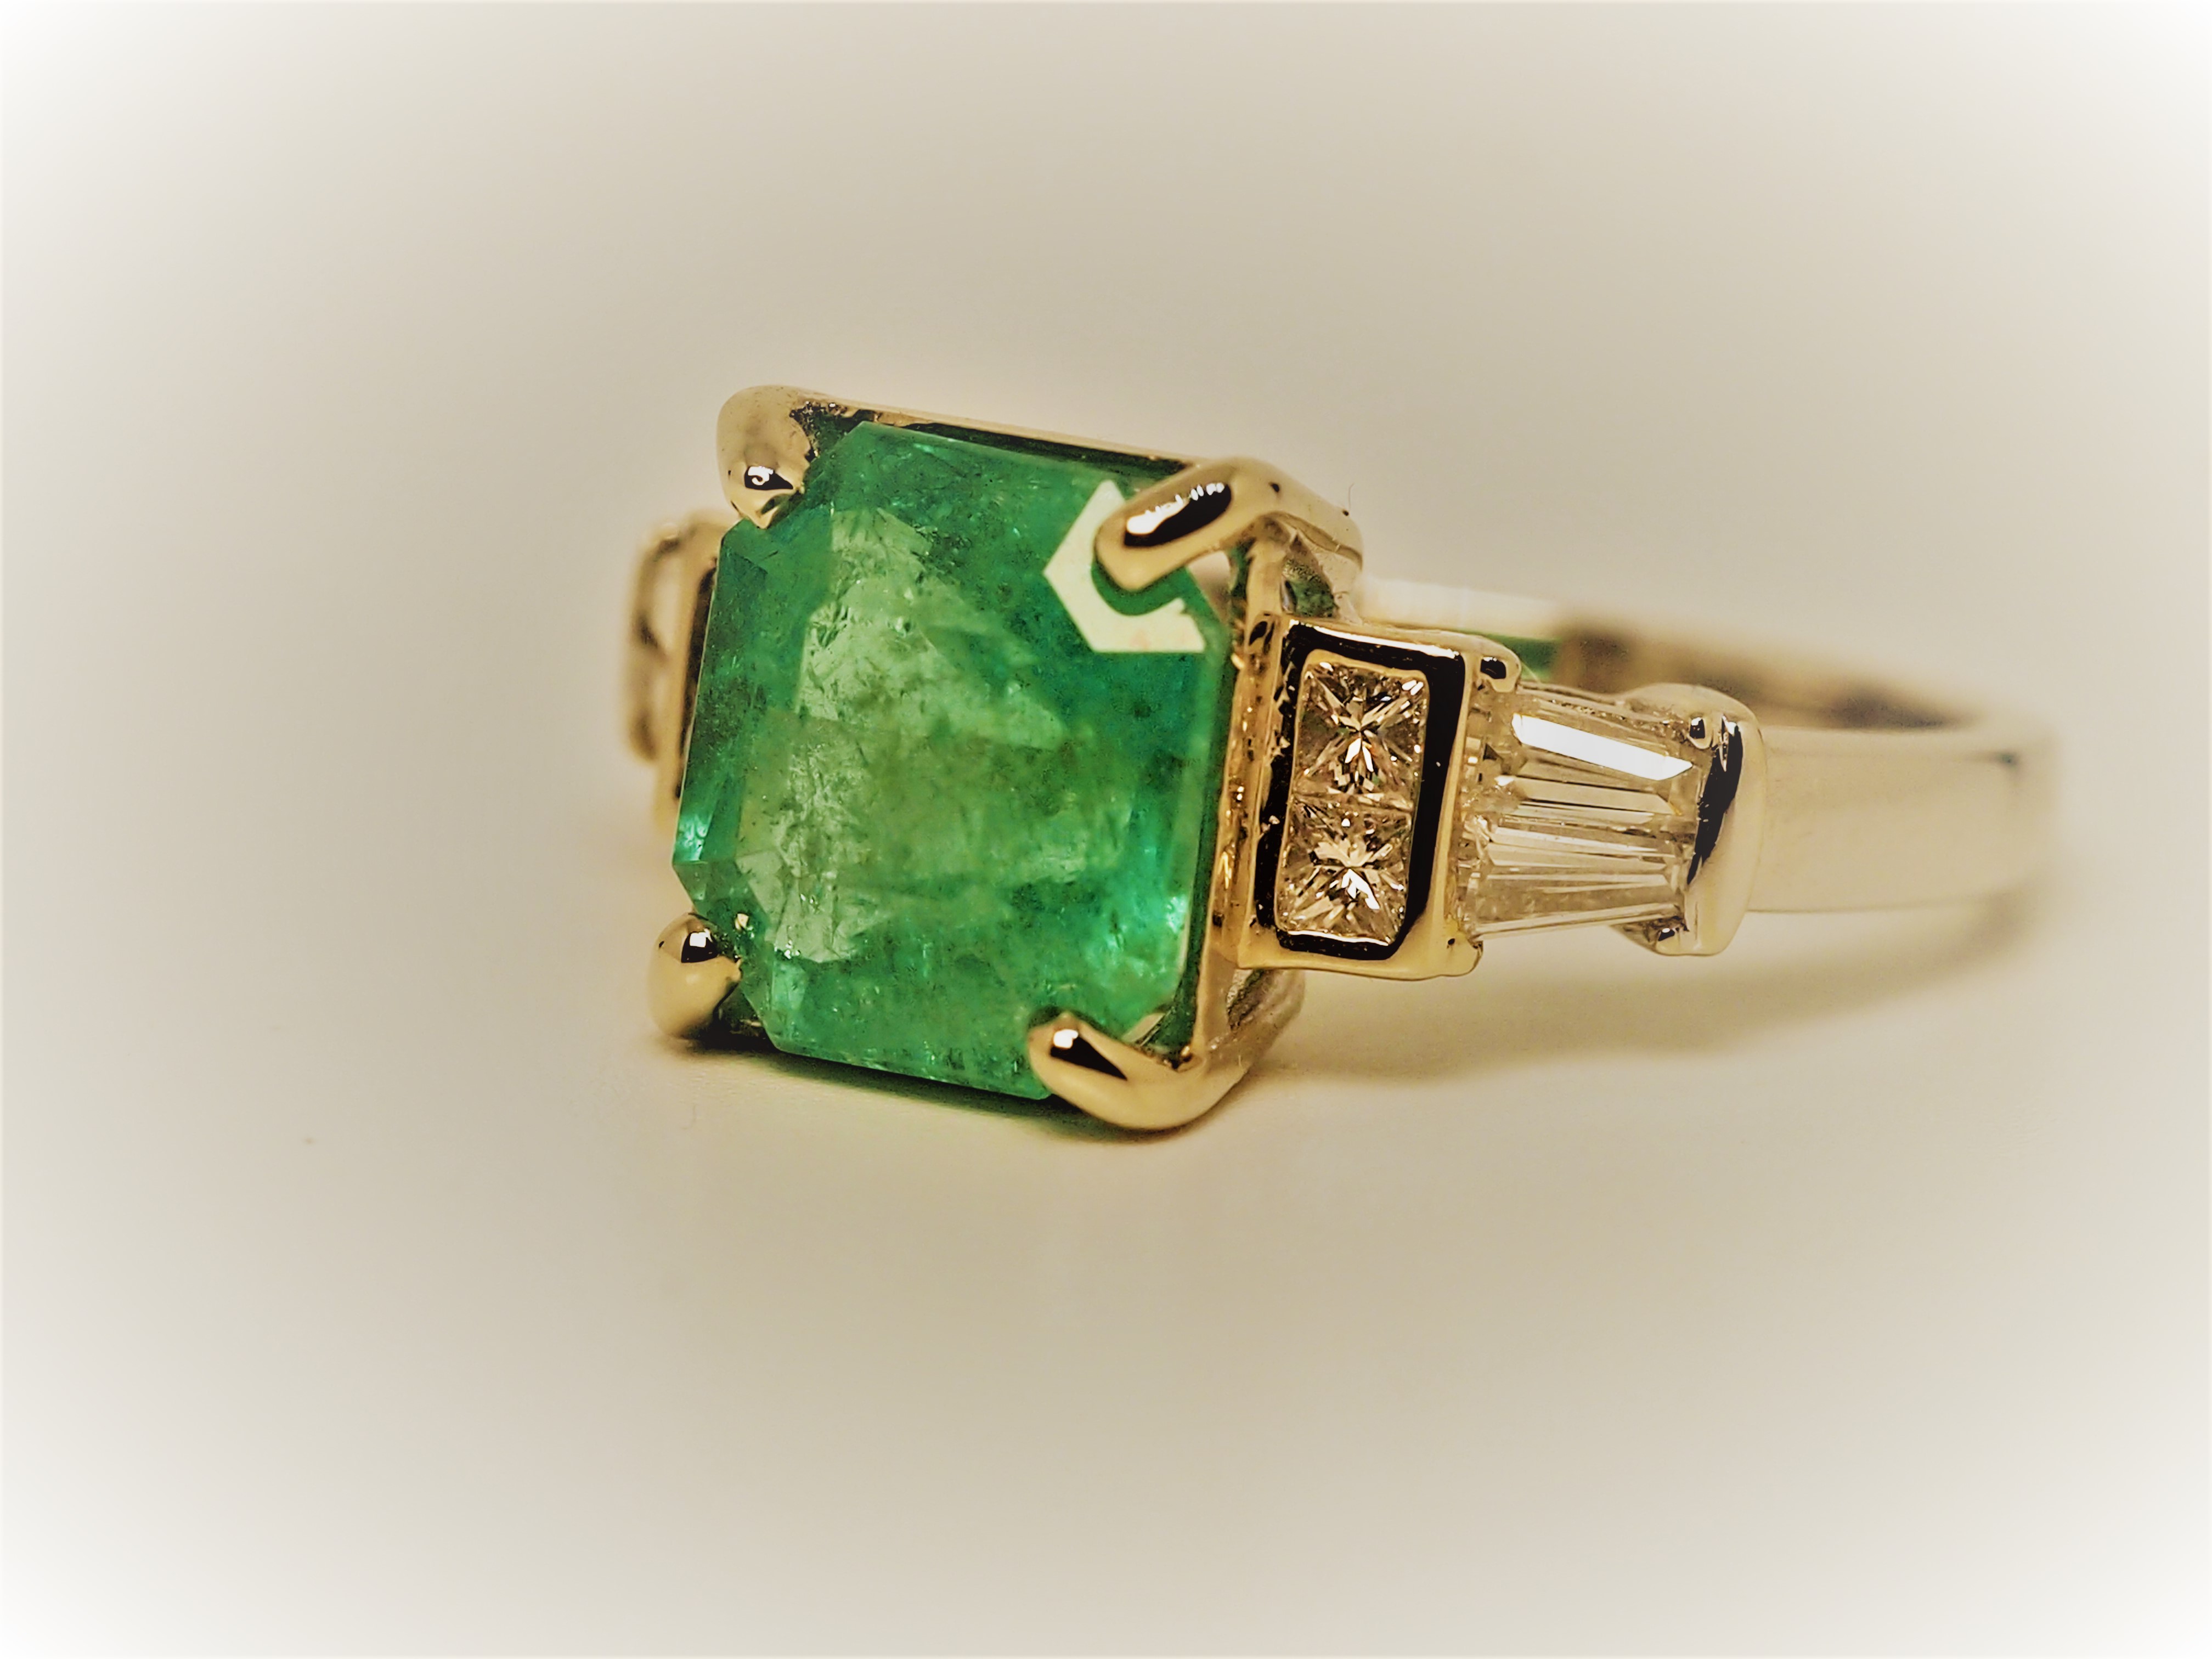 Exclusive Gia Certified 2.82 Ct Vivid Green Colombian Emerald & Diamonds Ring - Image 5 of 9